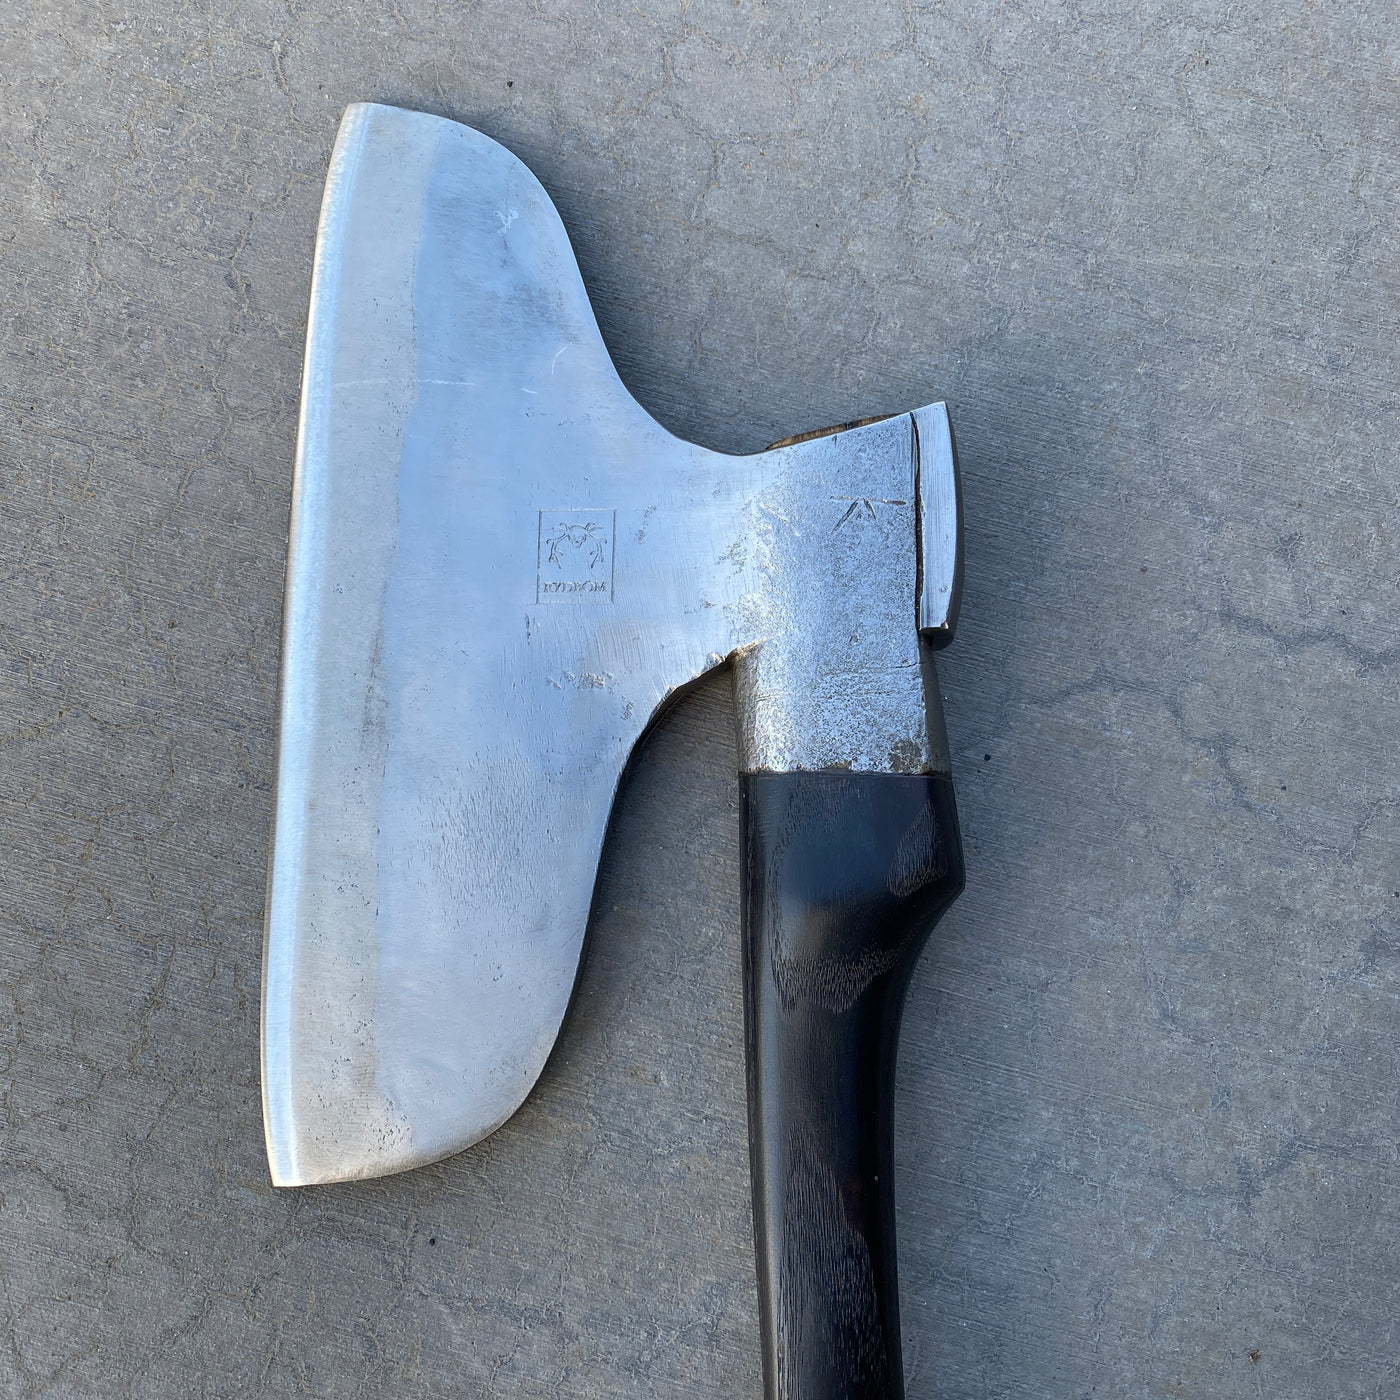 KA Heritage Collection - Hand Forged Swedish Hewing Axe